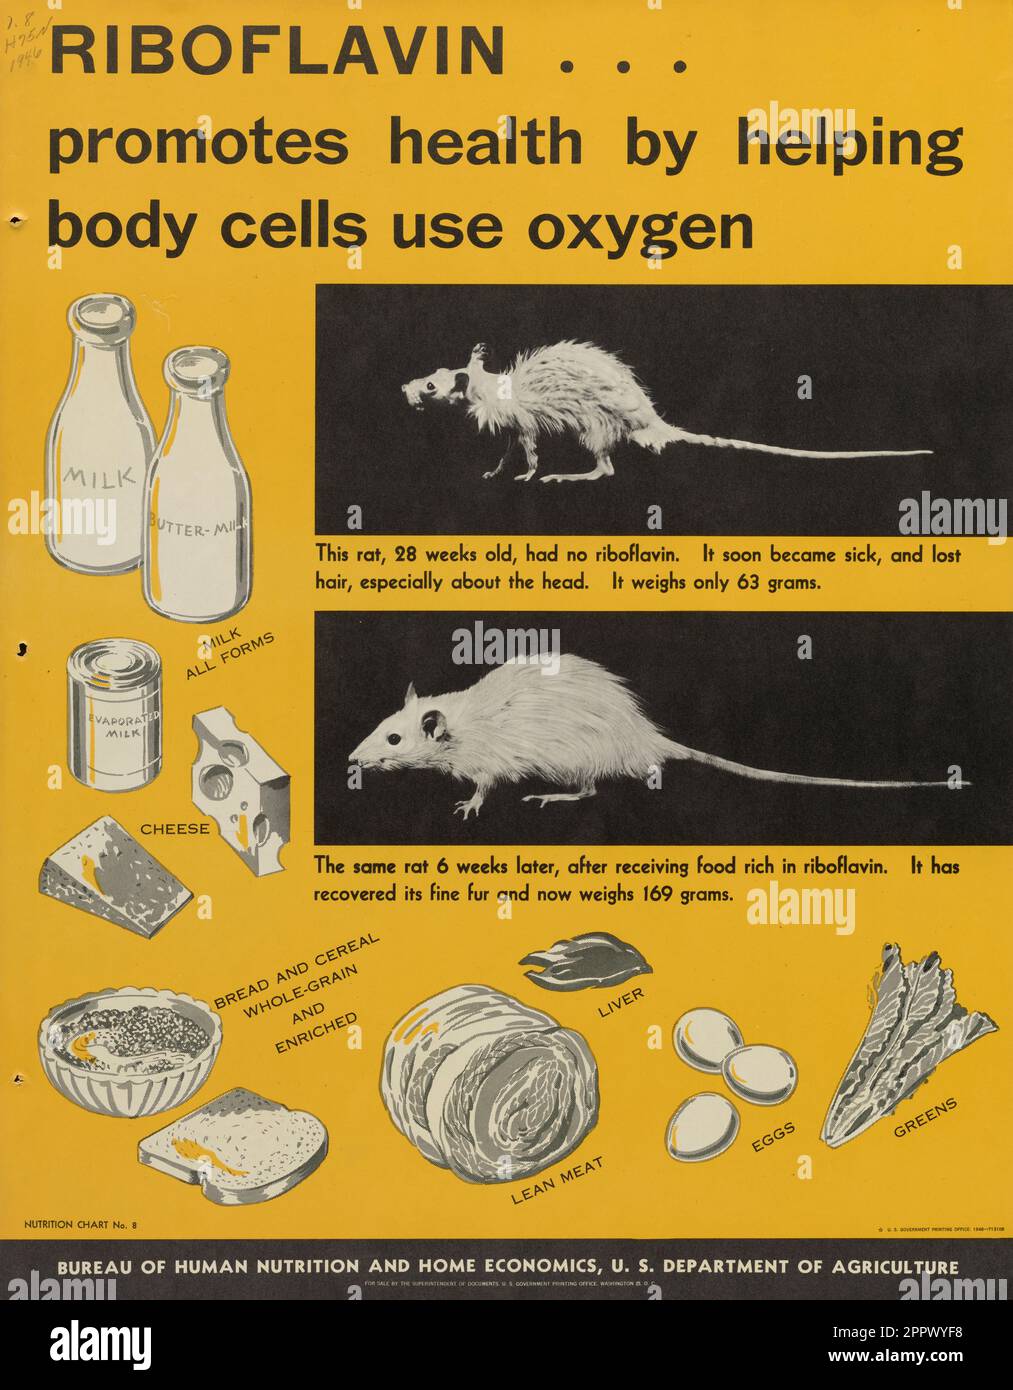 RIBOFLAVIN ... promotes health by helping body cells use oxygen by United States. Bureau of Human Nutrition and Home Economics Publication date 1946 Stock Photo